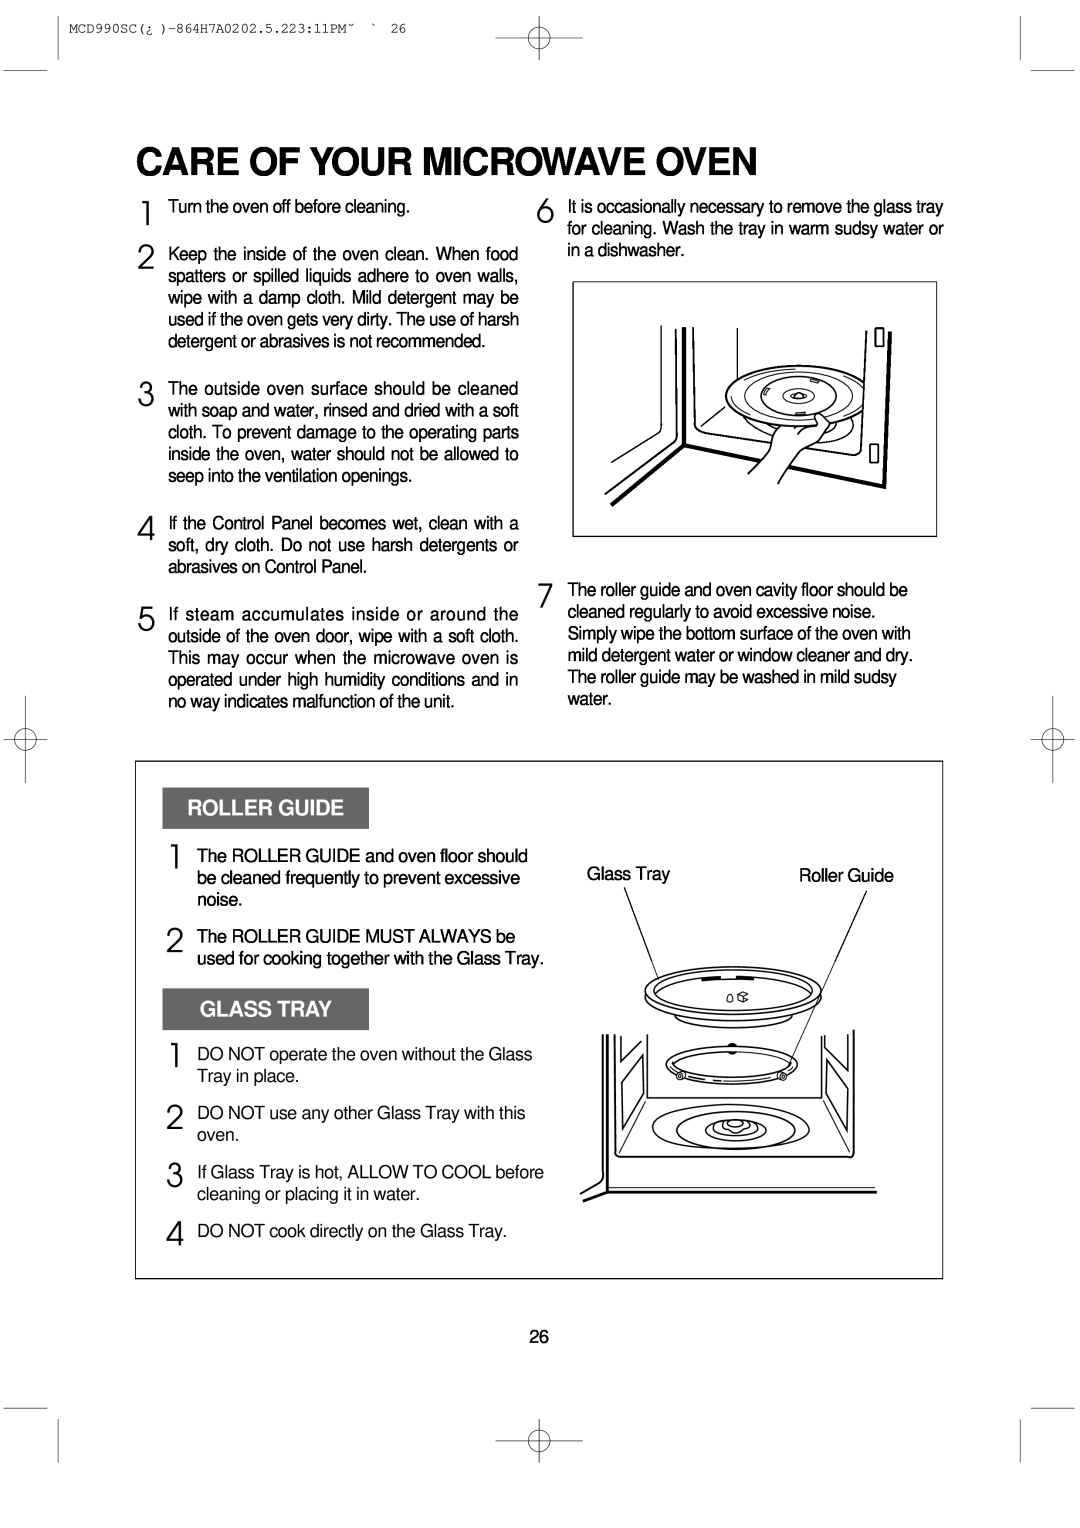 Magic Chef MCD990SC instruction manual Care Of Your Microwave Oven, Roller Guide, Glass Tray 